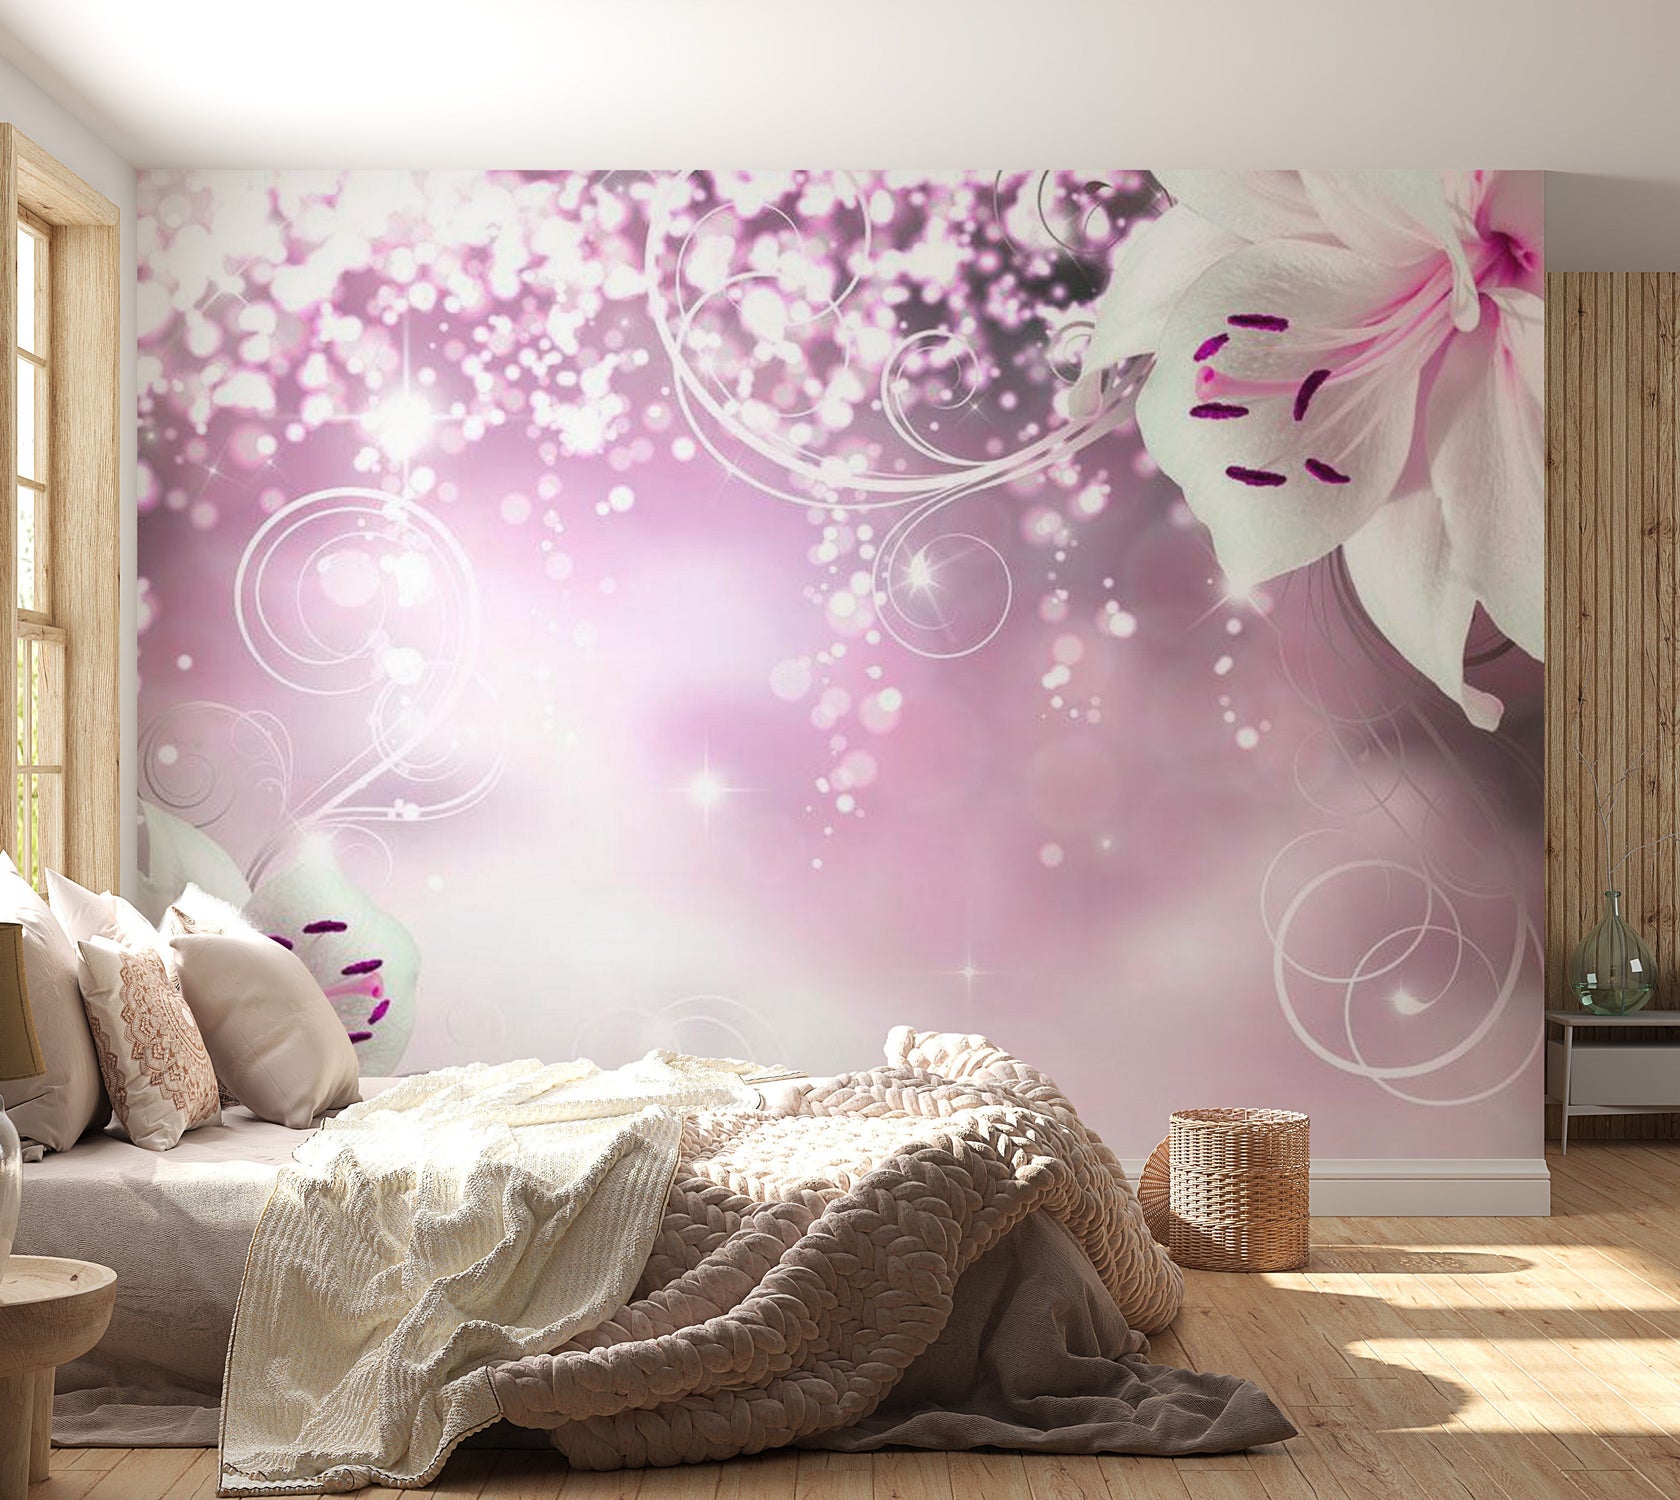 Peel & Stick Glam Wall Mural - Spell Of Lily - Removable Wall Decals